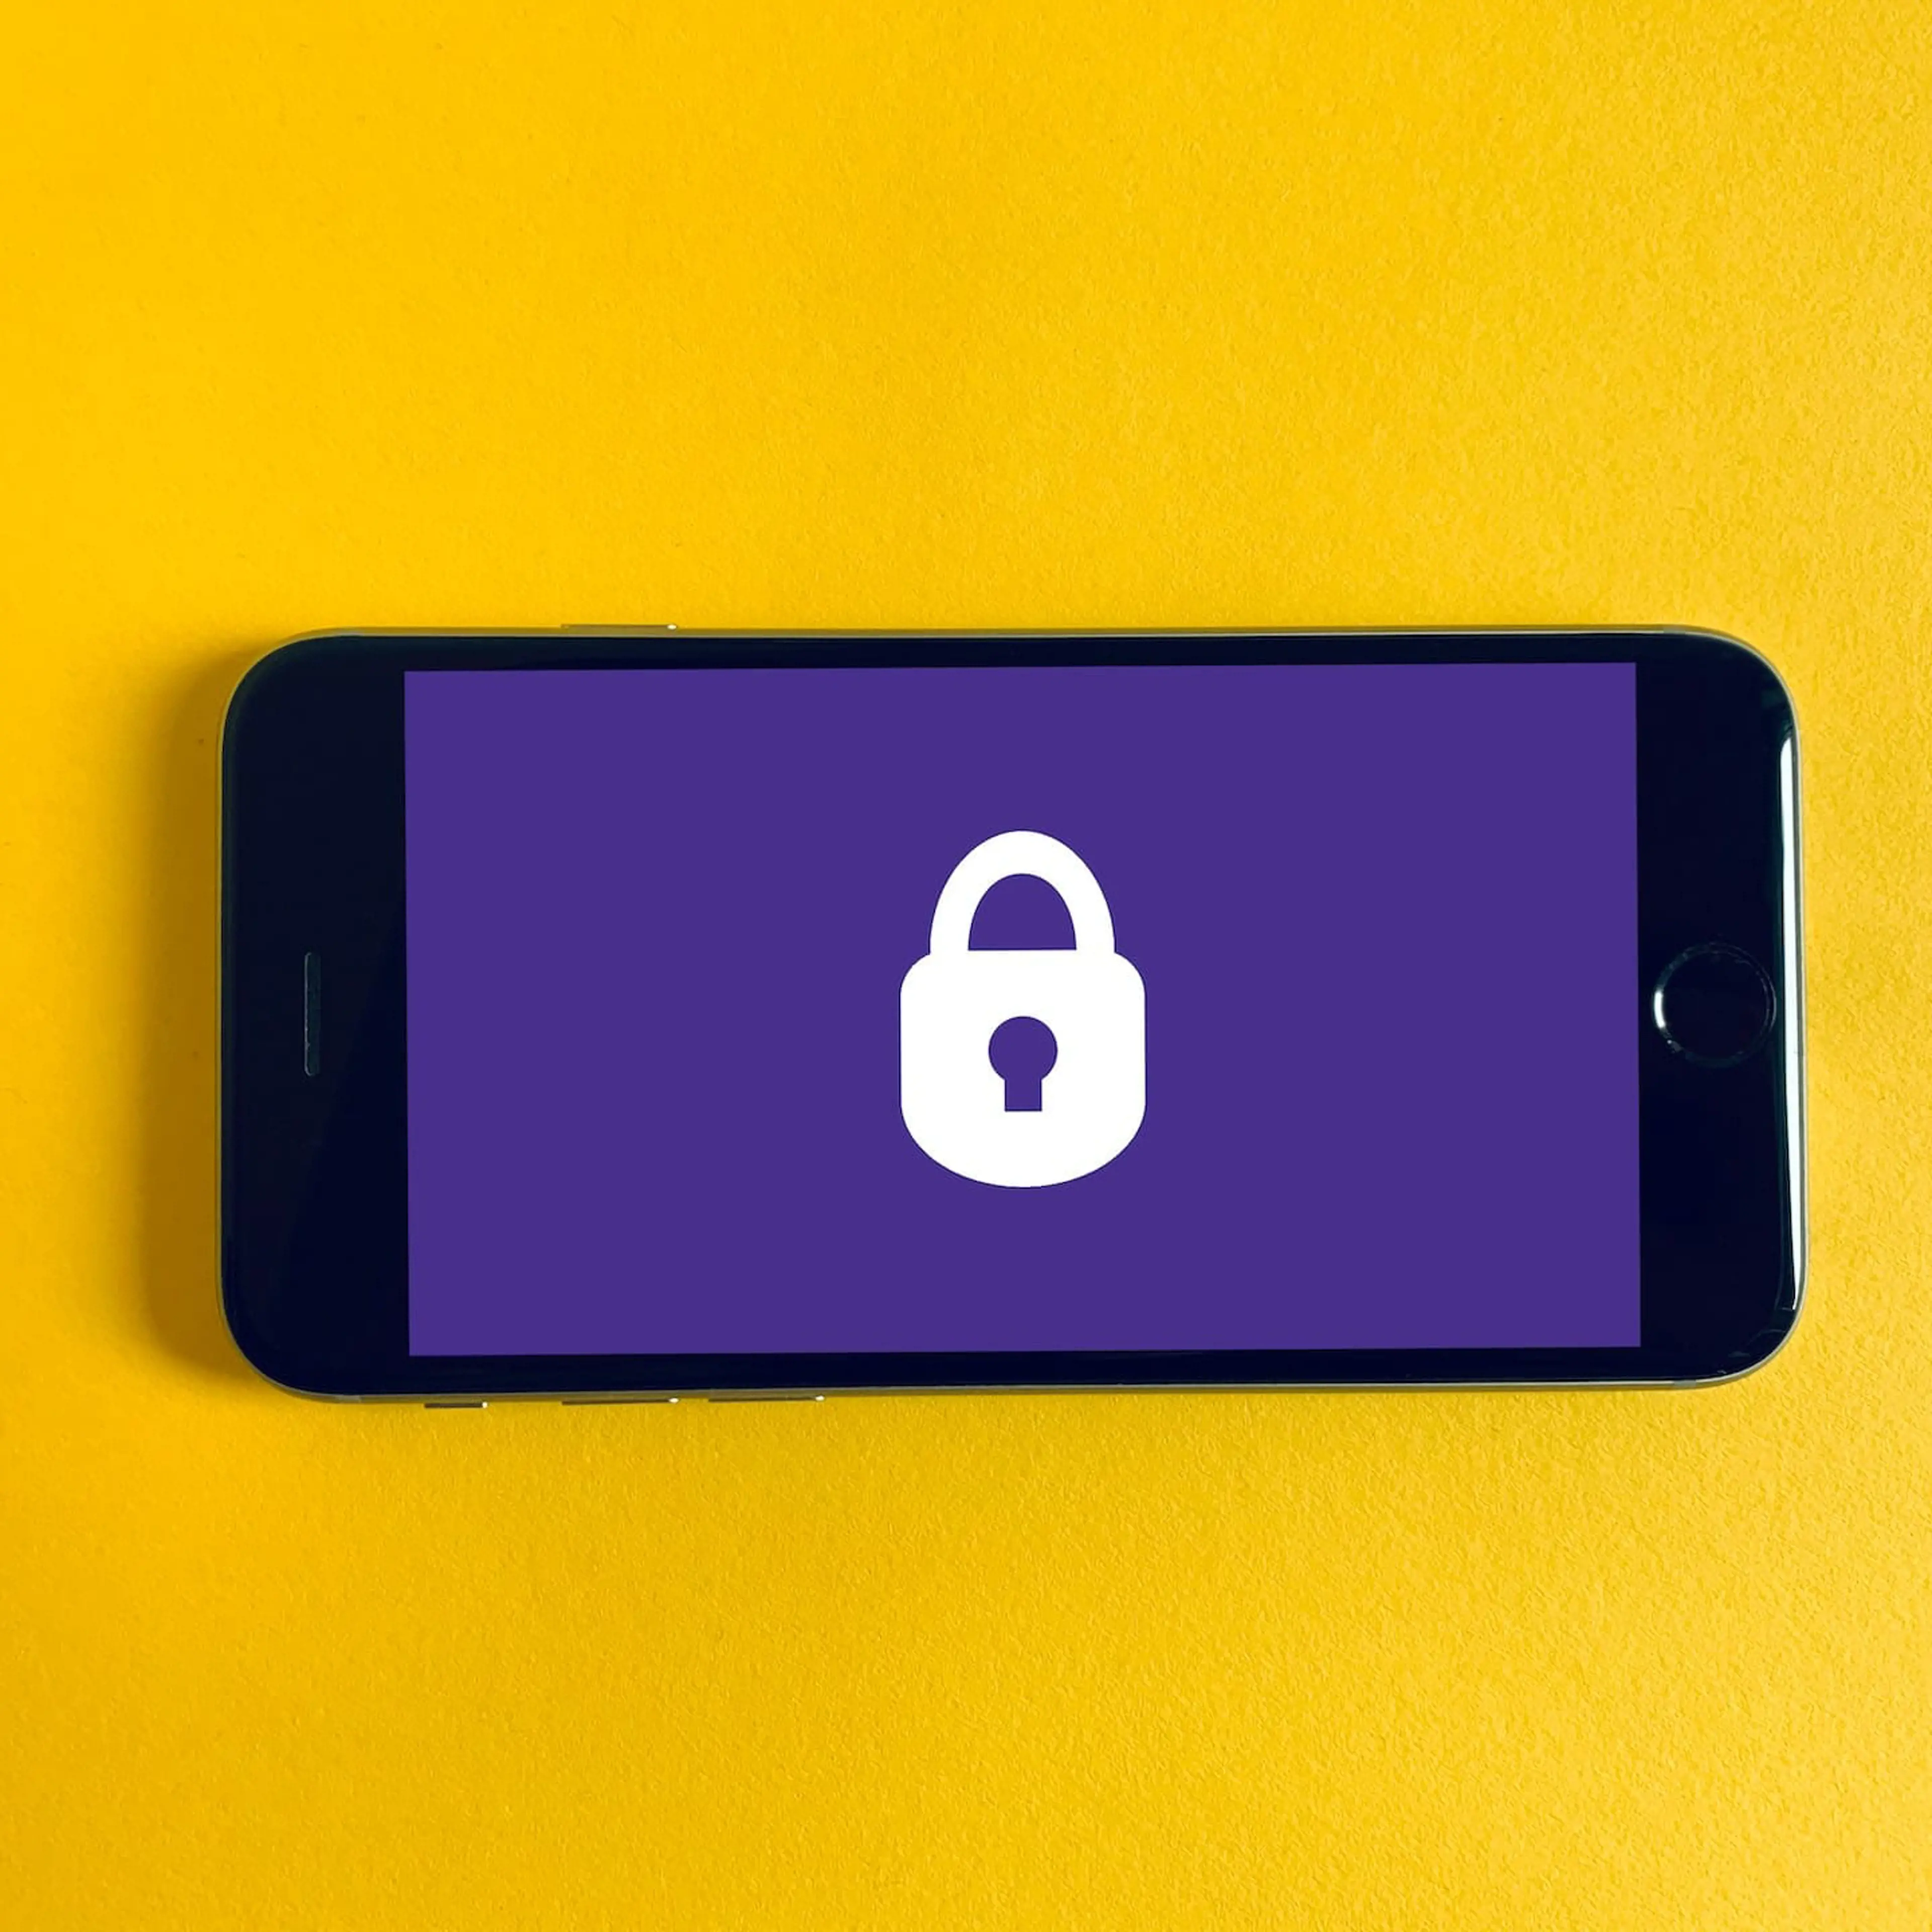 Locked Iphone on a yellow background